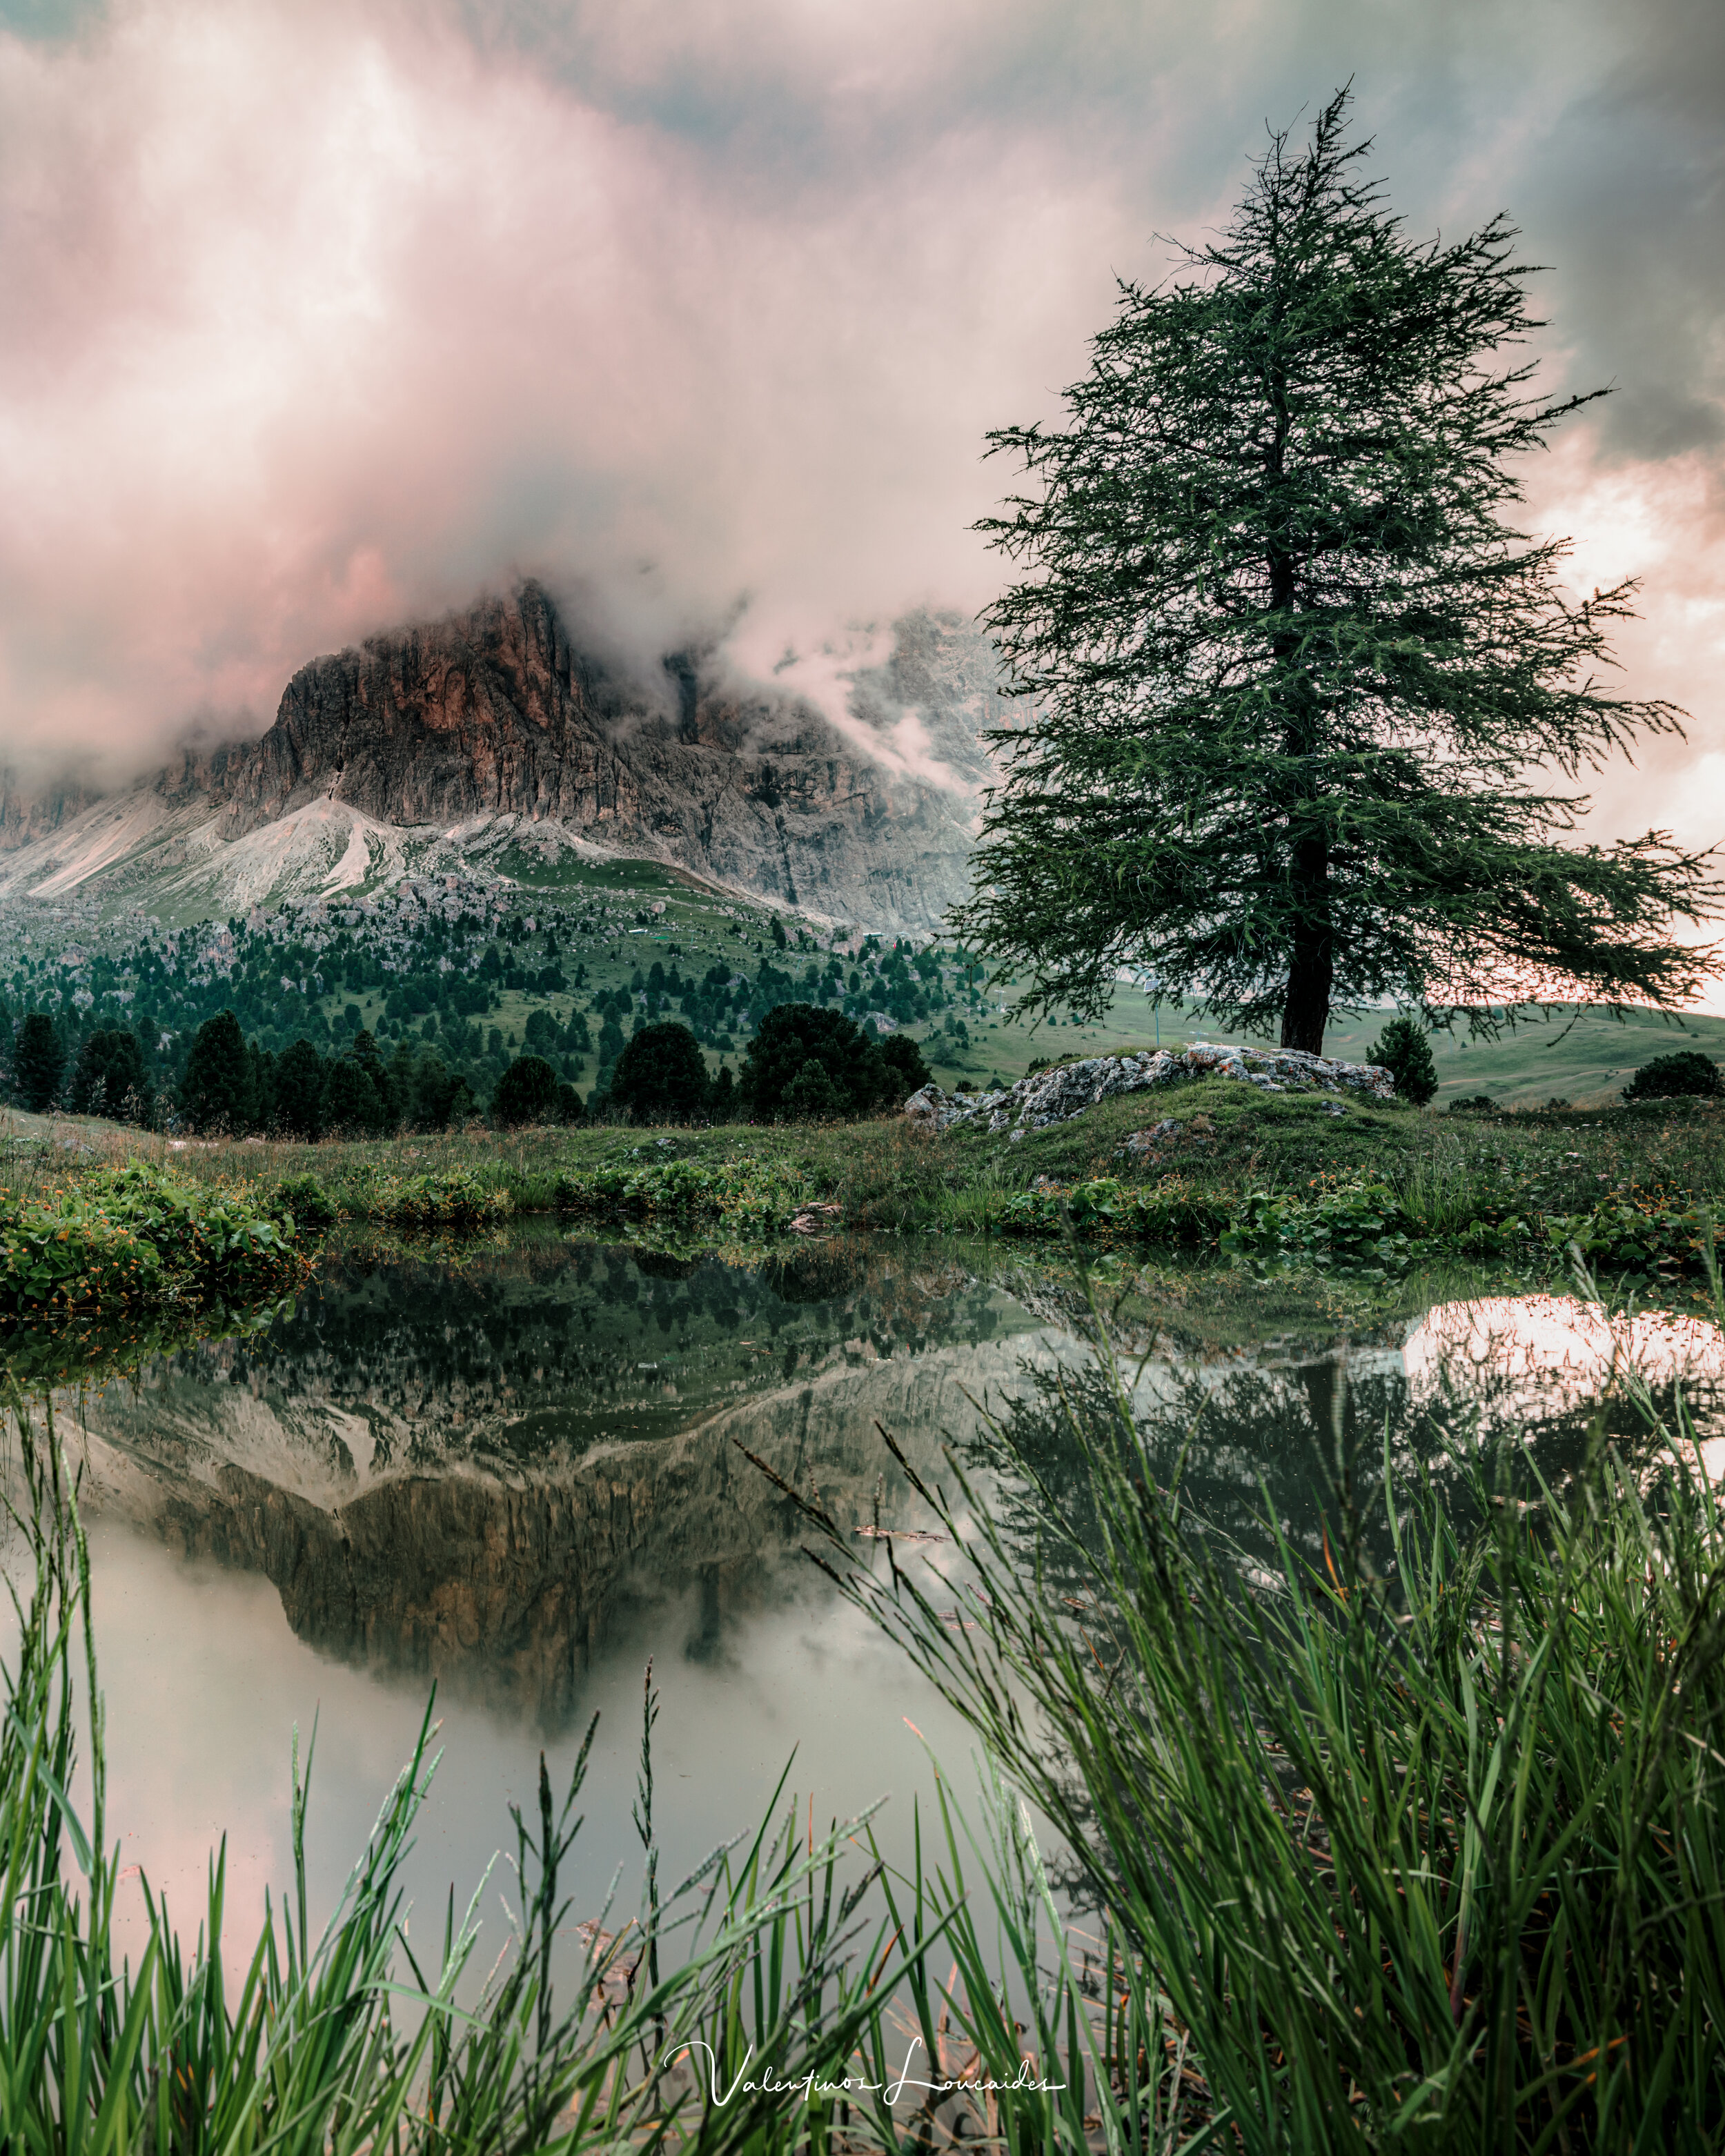 Passo Sella - Landscape Photography by Valentinos Loucaides